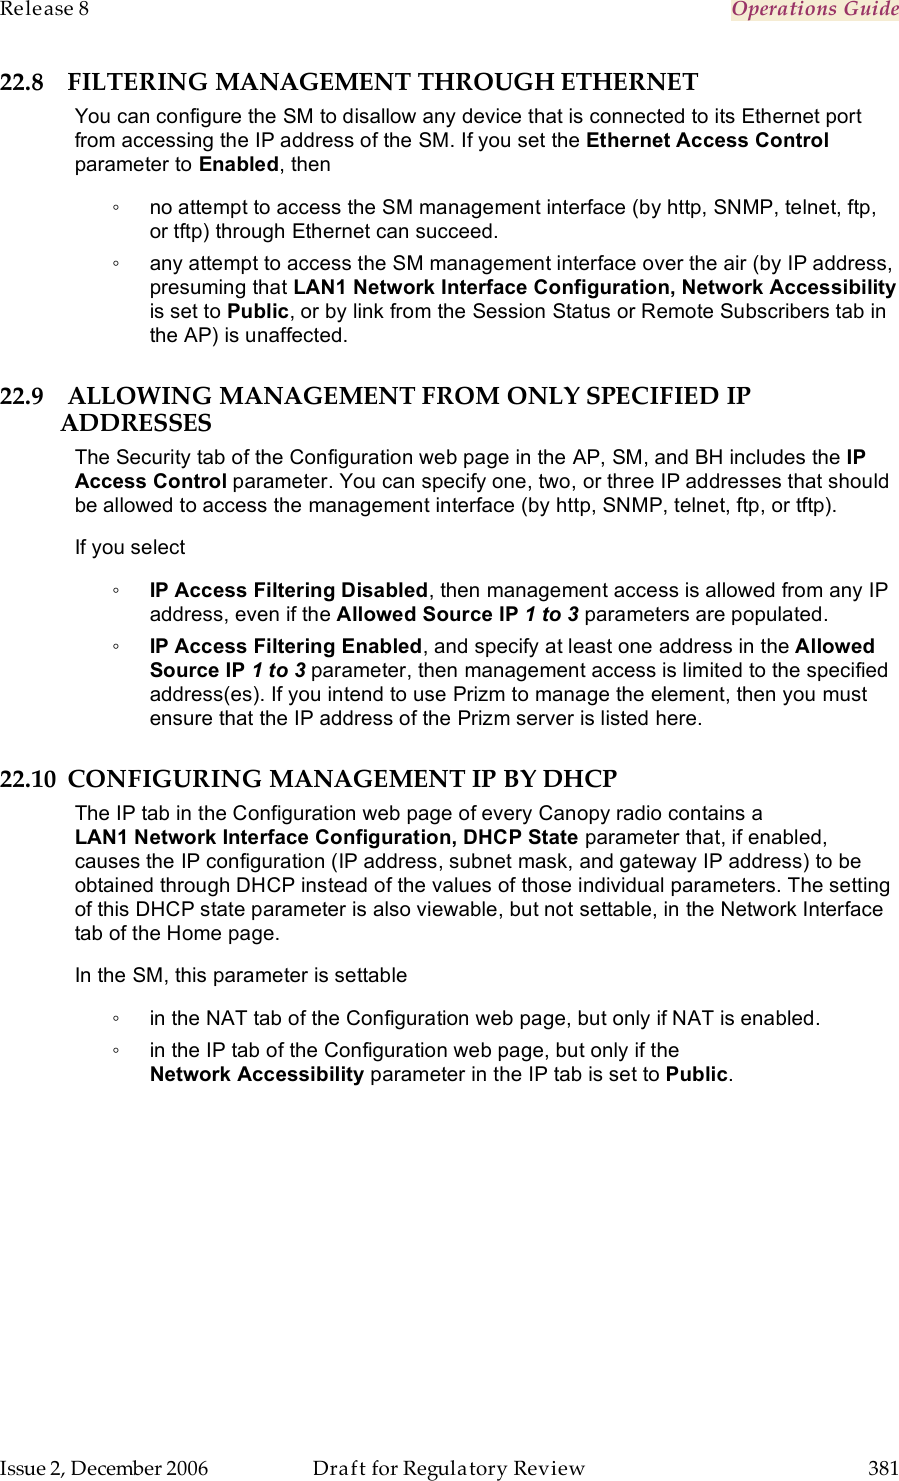 Release 8    Operations Guide   Issue 2, December 2006  Draft for Regulatory Review  381     22.8 FILTERING MANAGEMENT THROUGH ETHERNET You can configure the SM to disallow any device that is connected to its Ethernet port from accessing the IP address of the SM. If you set the Ethernet Access Control parameter to Enabled, then ◦  no attempt to access the SM management interface (by http, SNMP, telnet, ftp, or tftp) through Ethernet can succeed. ◦  any attempt to access the SM management interface over the air (by IP address, presuming that LAN1 Network Interface Configuration, Network Accessibility is set to Public, or by link from the Session Status or Remote Subscribers tab in the AP) is unaffected. 22.9 ALLOWING MANAGEMENT FROM ONLY SPECIFIED IP ADDRESSES The Security tab of the Configuration web page in the AP, SM, and BH includes the IP Access Control parameter. You can specify one, two, or three IP addresses that should be allowed to access the management interface (by http, SNMP, telnet, ftp, or tftp).  If you select ◦ IP Access Filtering Disabled, then management access is allowed from any IP address, even if the Allowed Source IP 1 to 3 parameters are populated. ◦ IP Access Filtering Enabled, and specify at least one address in the Allowed Source IP 1 to 3 parameter, then management access is limited to the specified address(es). If you intend to use Prizm to manage the element, then you must ensure that the IP address of the Prizm server is listed here.  22.10 CONFIGURING MANAGEMENT IP BY DHCP The IP tab in the Configuration web page of every Canopy radio contains a LAN1 Network Interface Configuration, DHCP State parameter that, if enabled, causes the IP configuration (IP address, subnet mask, and gateway IP address) to be obtained through DHCP instead of the values of those individual parameters. The setting of this DHCP state parameter is also viewable, but not settable, in the Network Interface tab of the Home page.  In the SM, this parameter is settable ◦  in the NAT tab of the Configuration web page, but only if NAT is enabled. ◦  in the IP tab of the Configuration web page, but only if the Network Accessibility parameter in the IP tab is set to Public. 